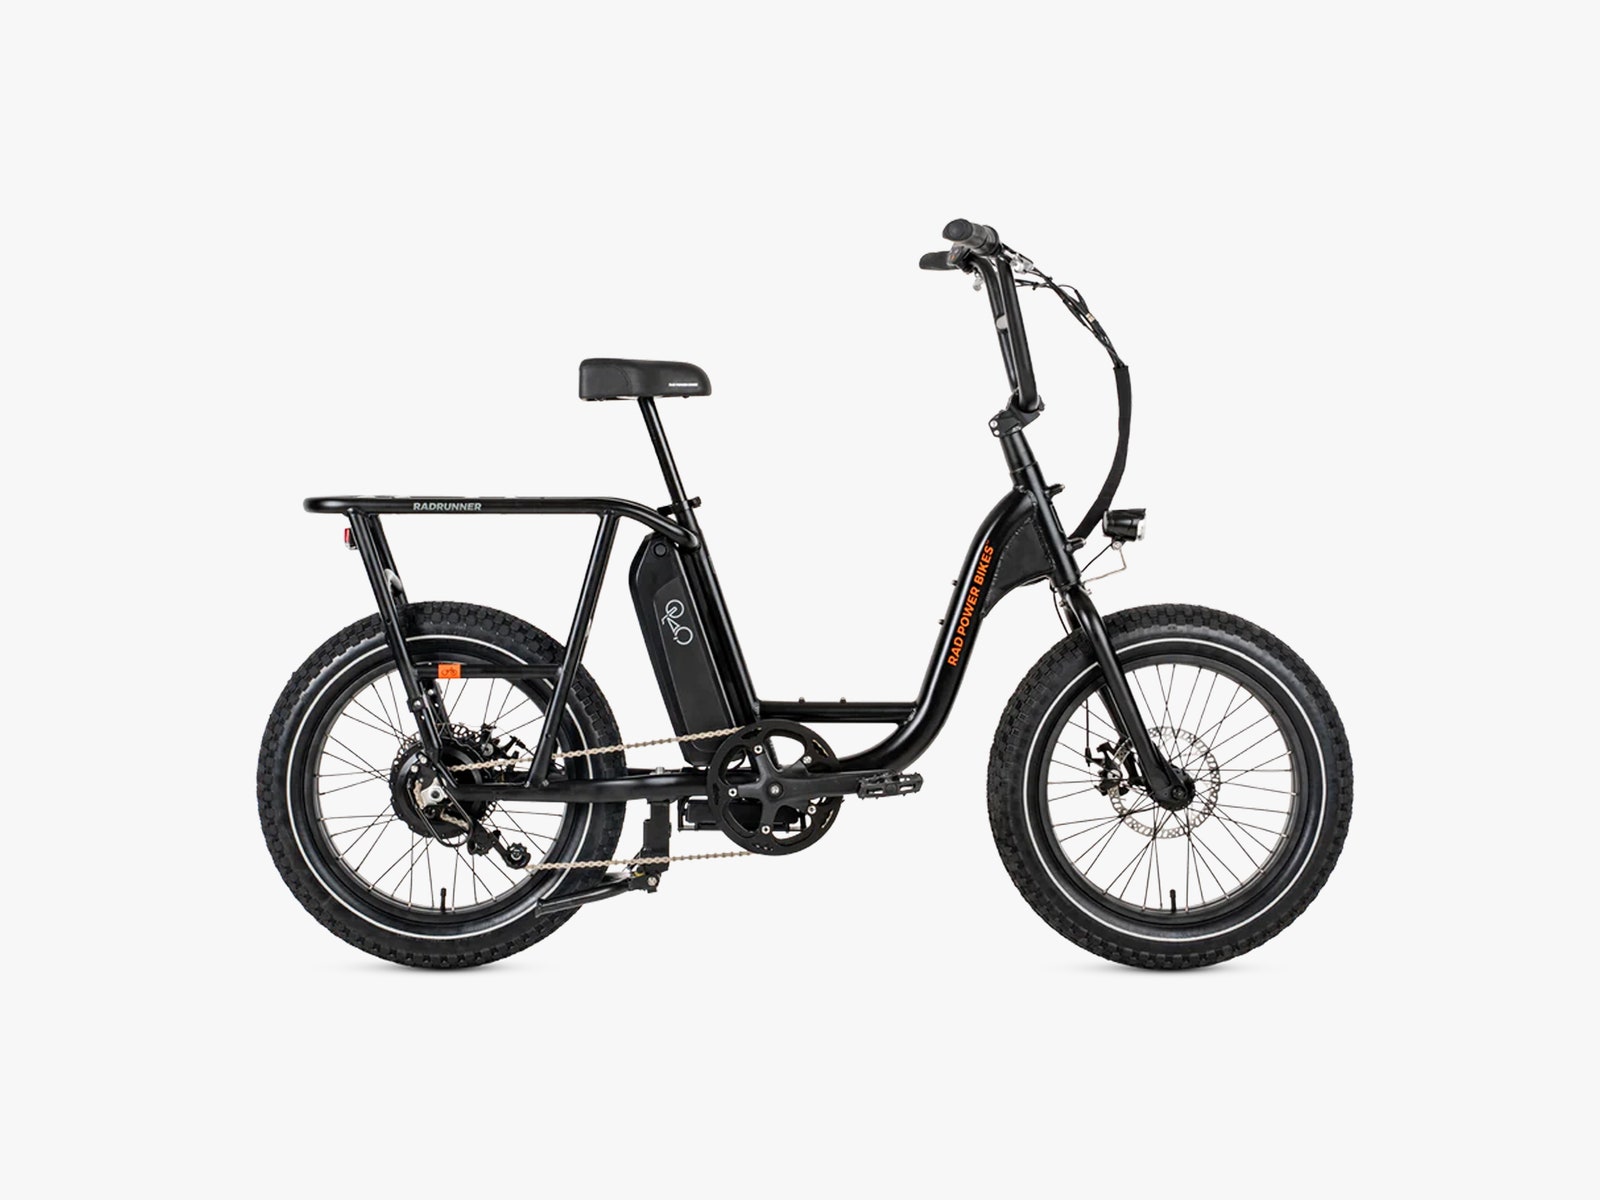 Side view of black electric bicycle.